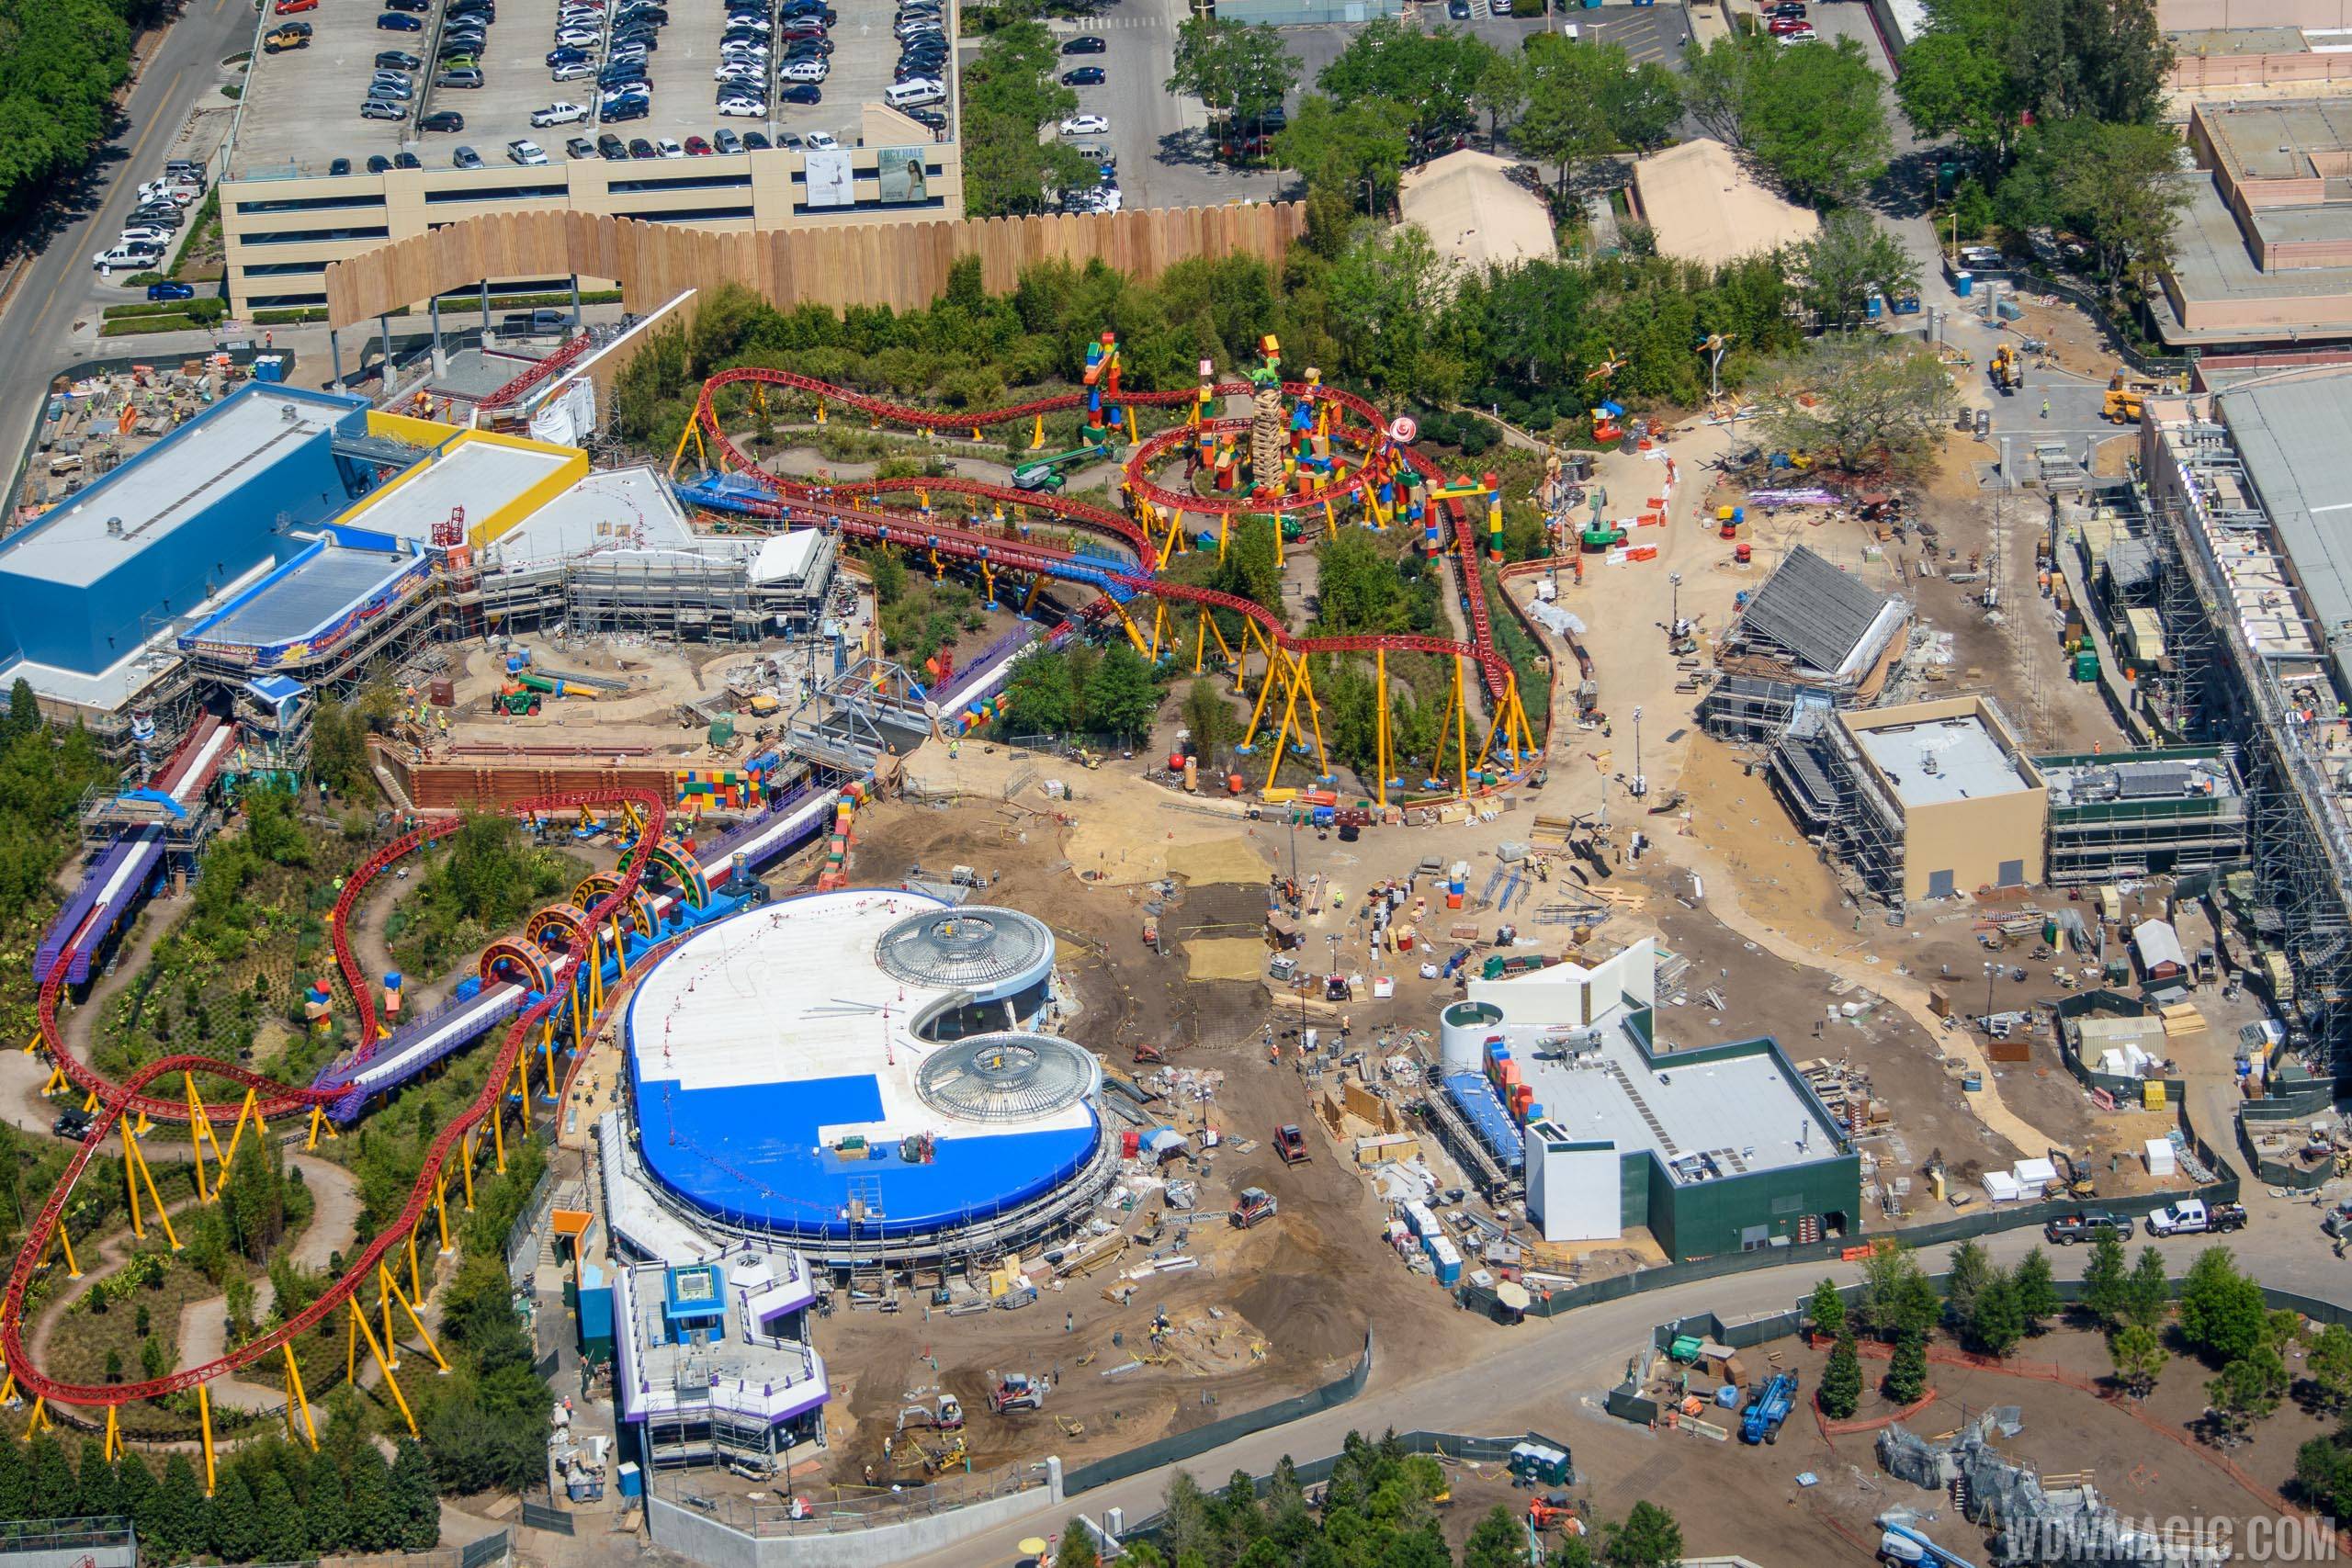 PHOTOS - Latest birds-eye view of Toy Story Land at Disney's Hollywood Studios